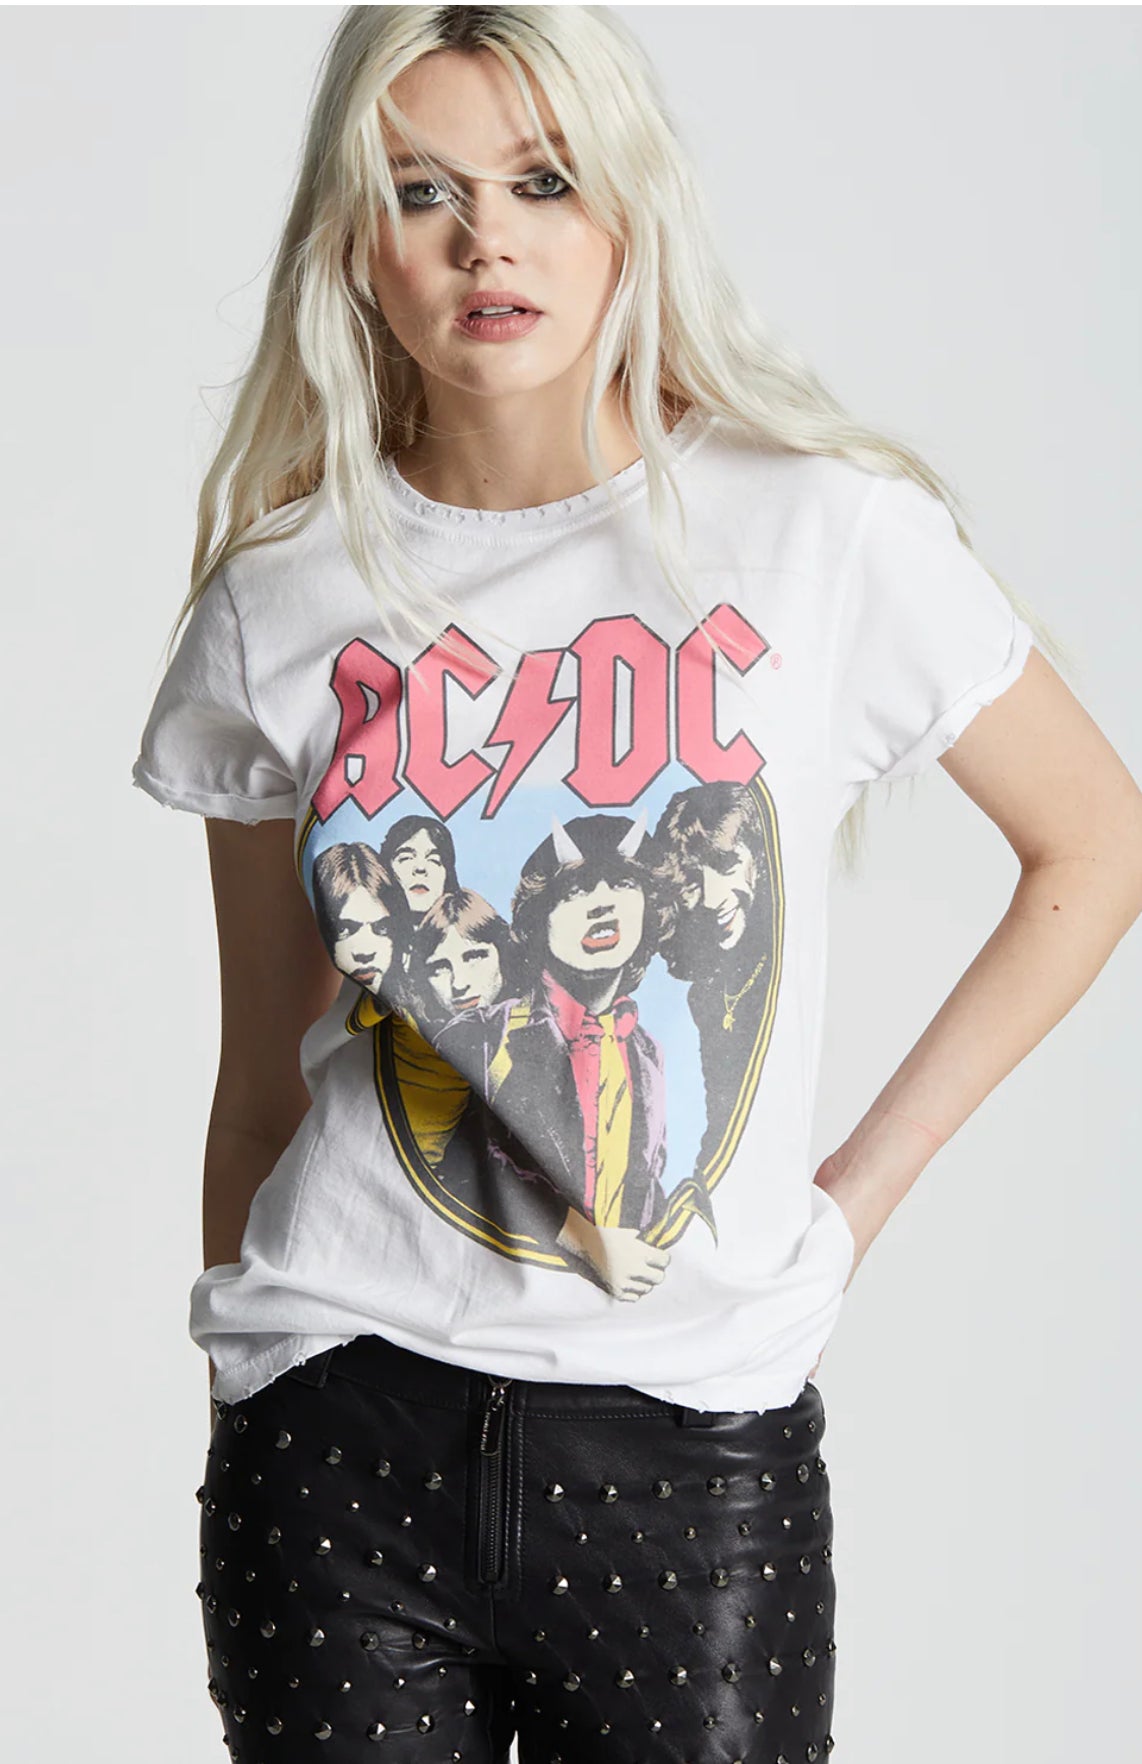 AC/DC Highway To Hell Tshirt